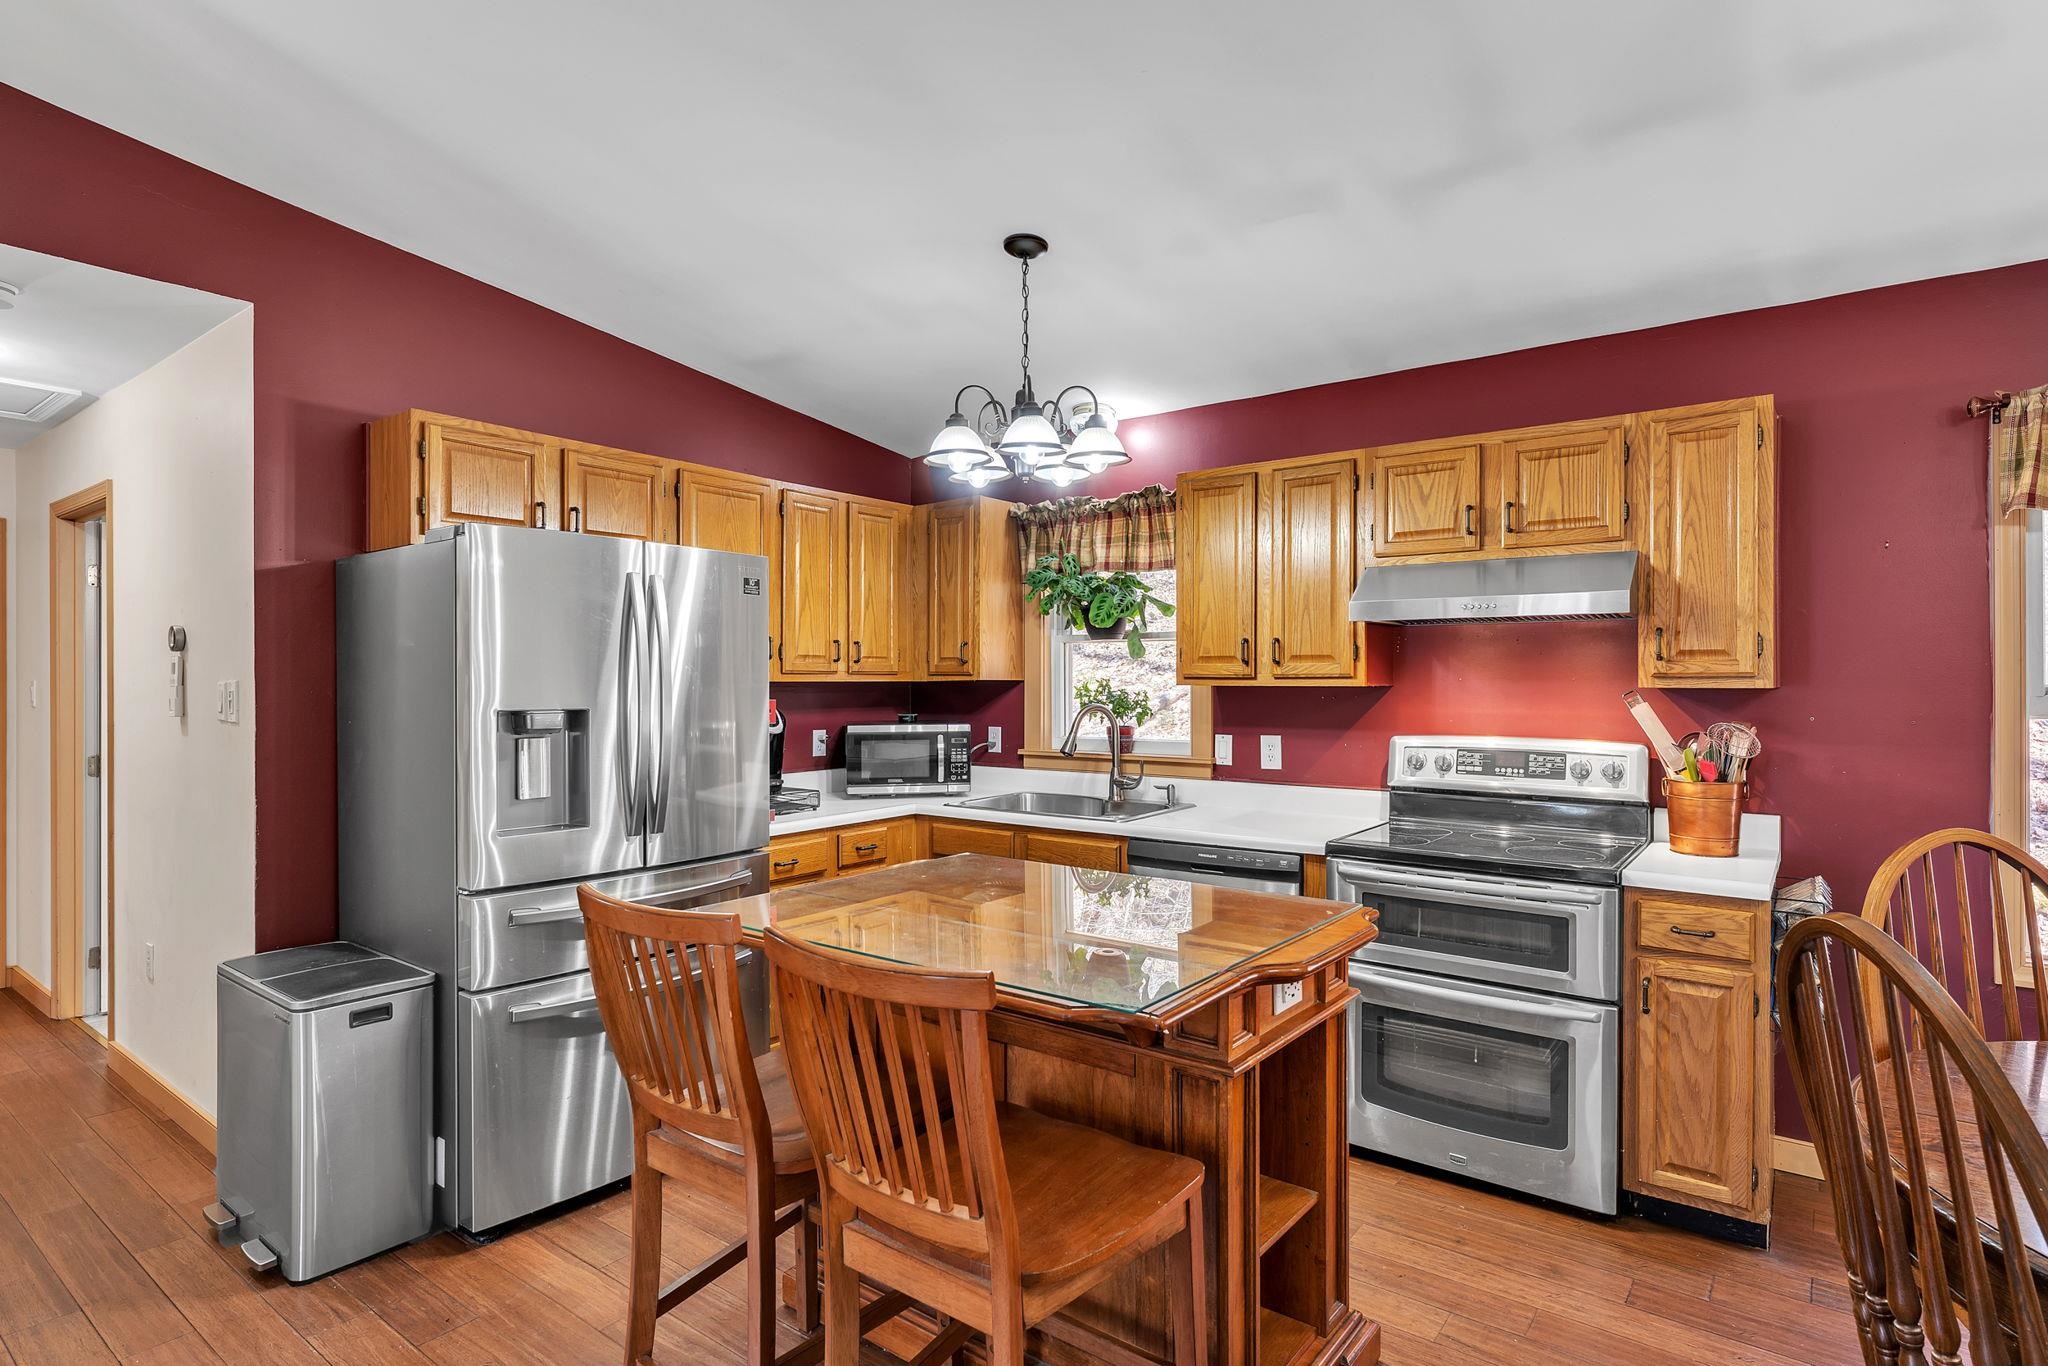 Kitchen with updated appliances and lovely kitchen island